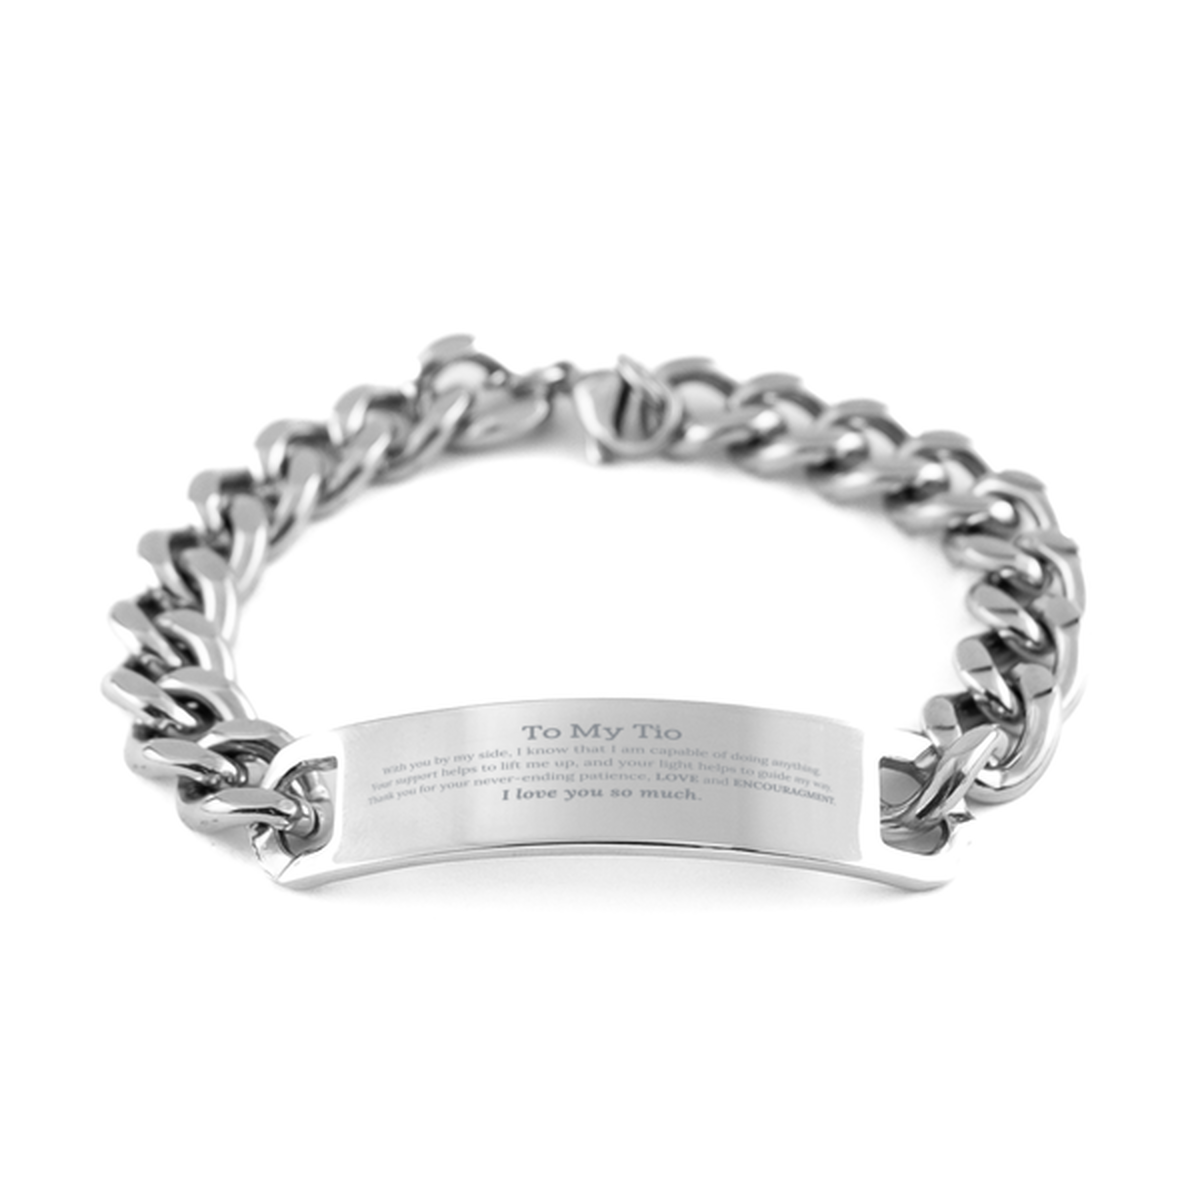 Appreciation Tio Cuban Chain Stainless Steel Bracelet Gifts, To My Tio Birthday Christmas Wedding Keepsake Gifts for Tio With you by my side, I know that I am capable of doing anything. I love you so much